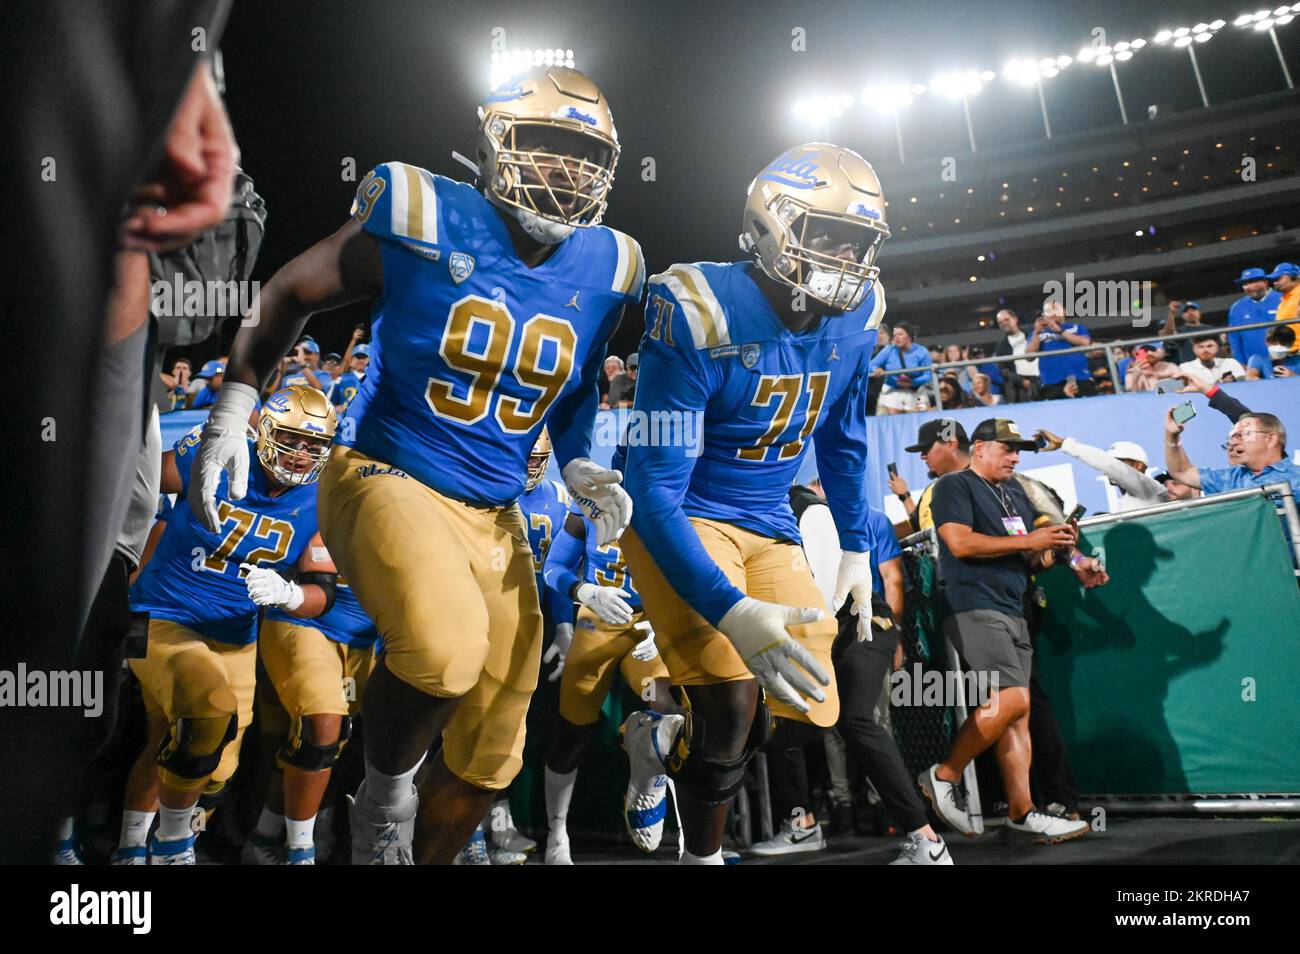 UCLA Bruins enter the field during an NCAA football game against the Washington Huskies, Friday, Sep. 30, 2022, in Pasadena, Calif. The UCLA Bruins de Stock Photo